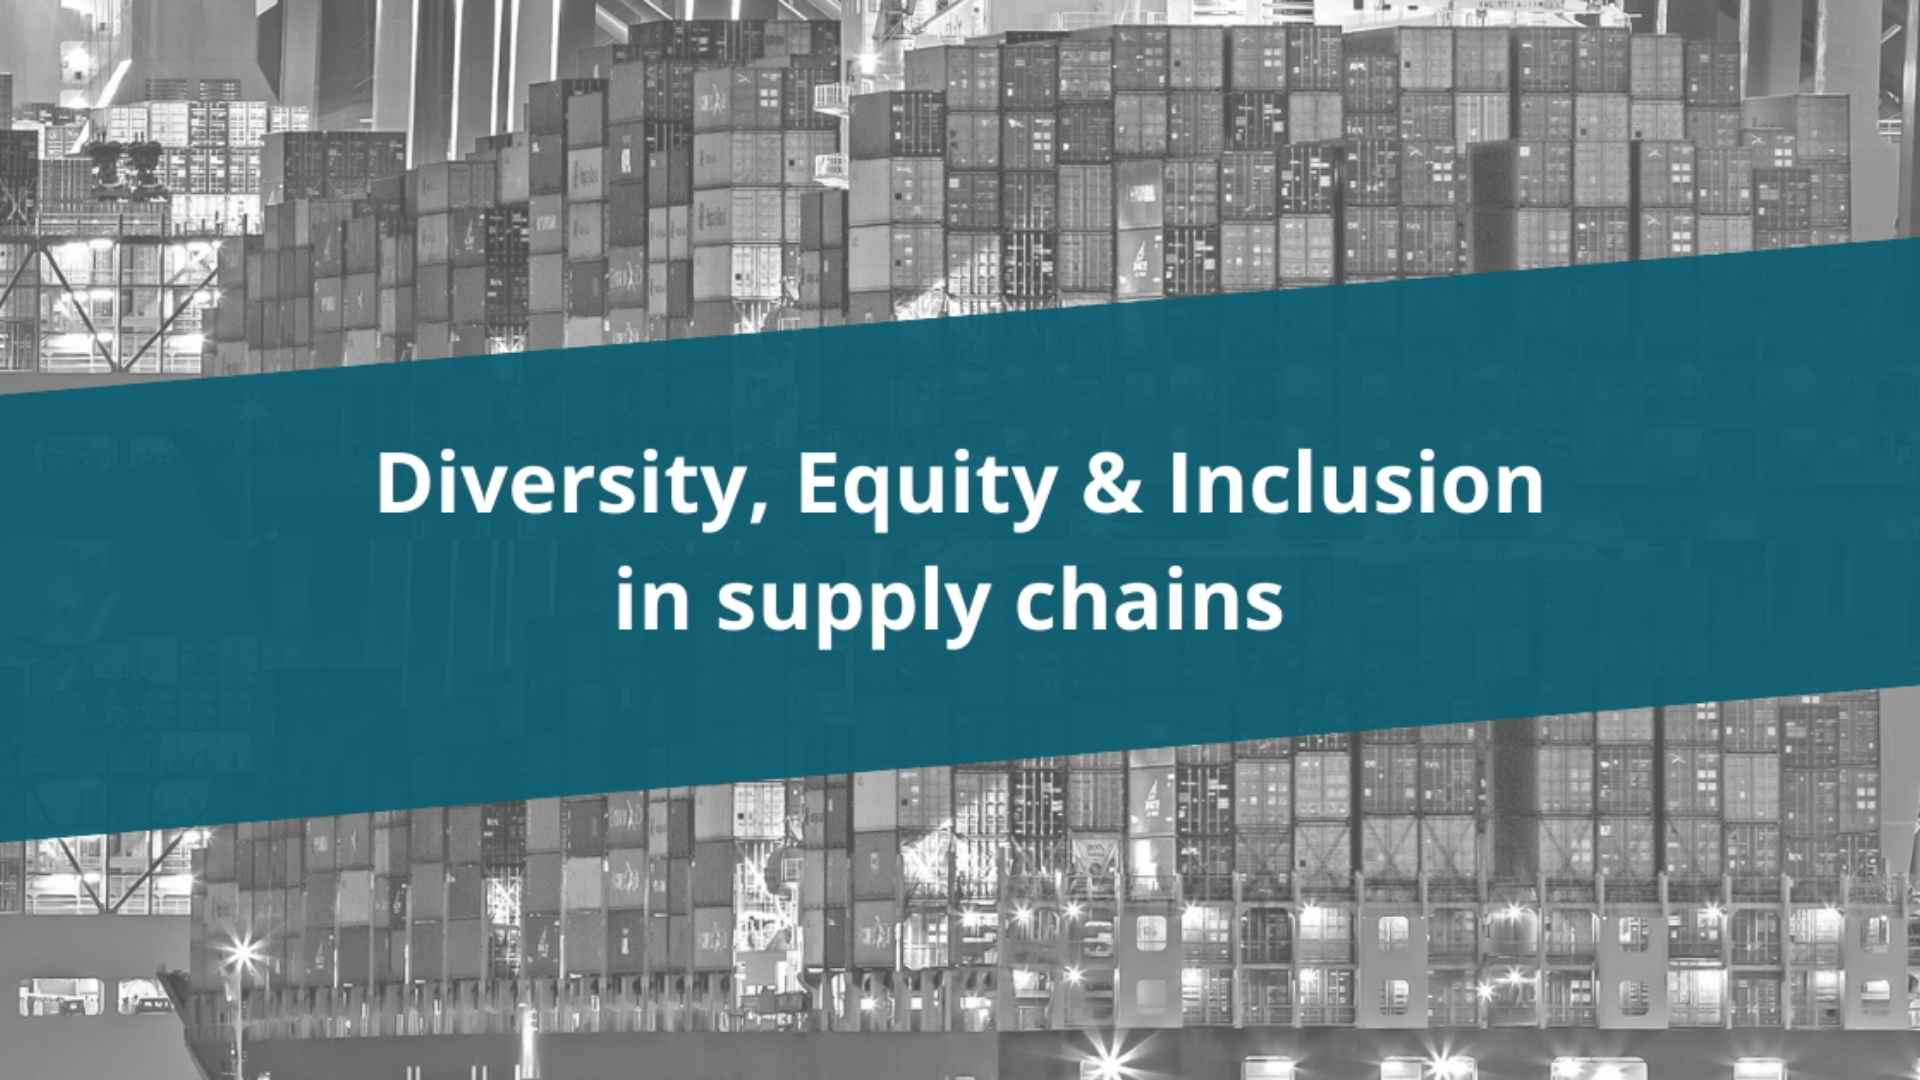 Diversity, Equity & Inclusion (DE&I) in supply chains